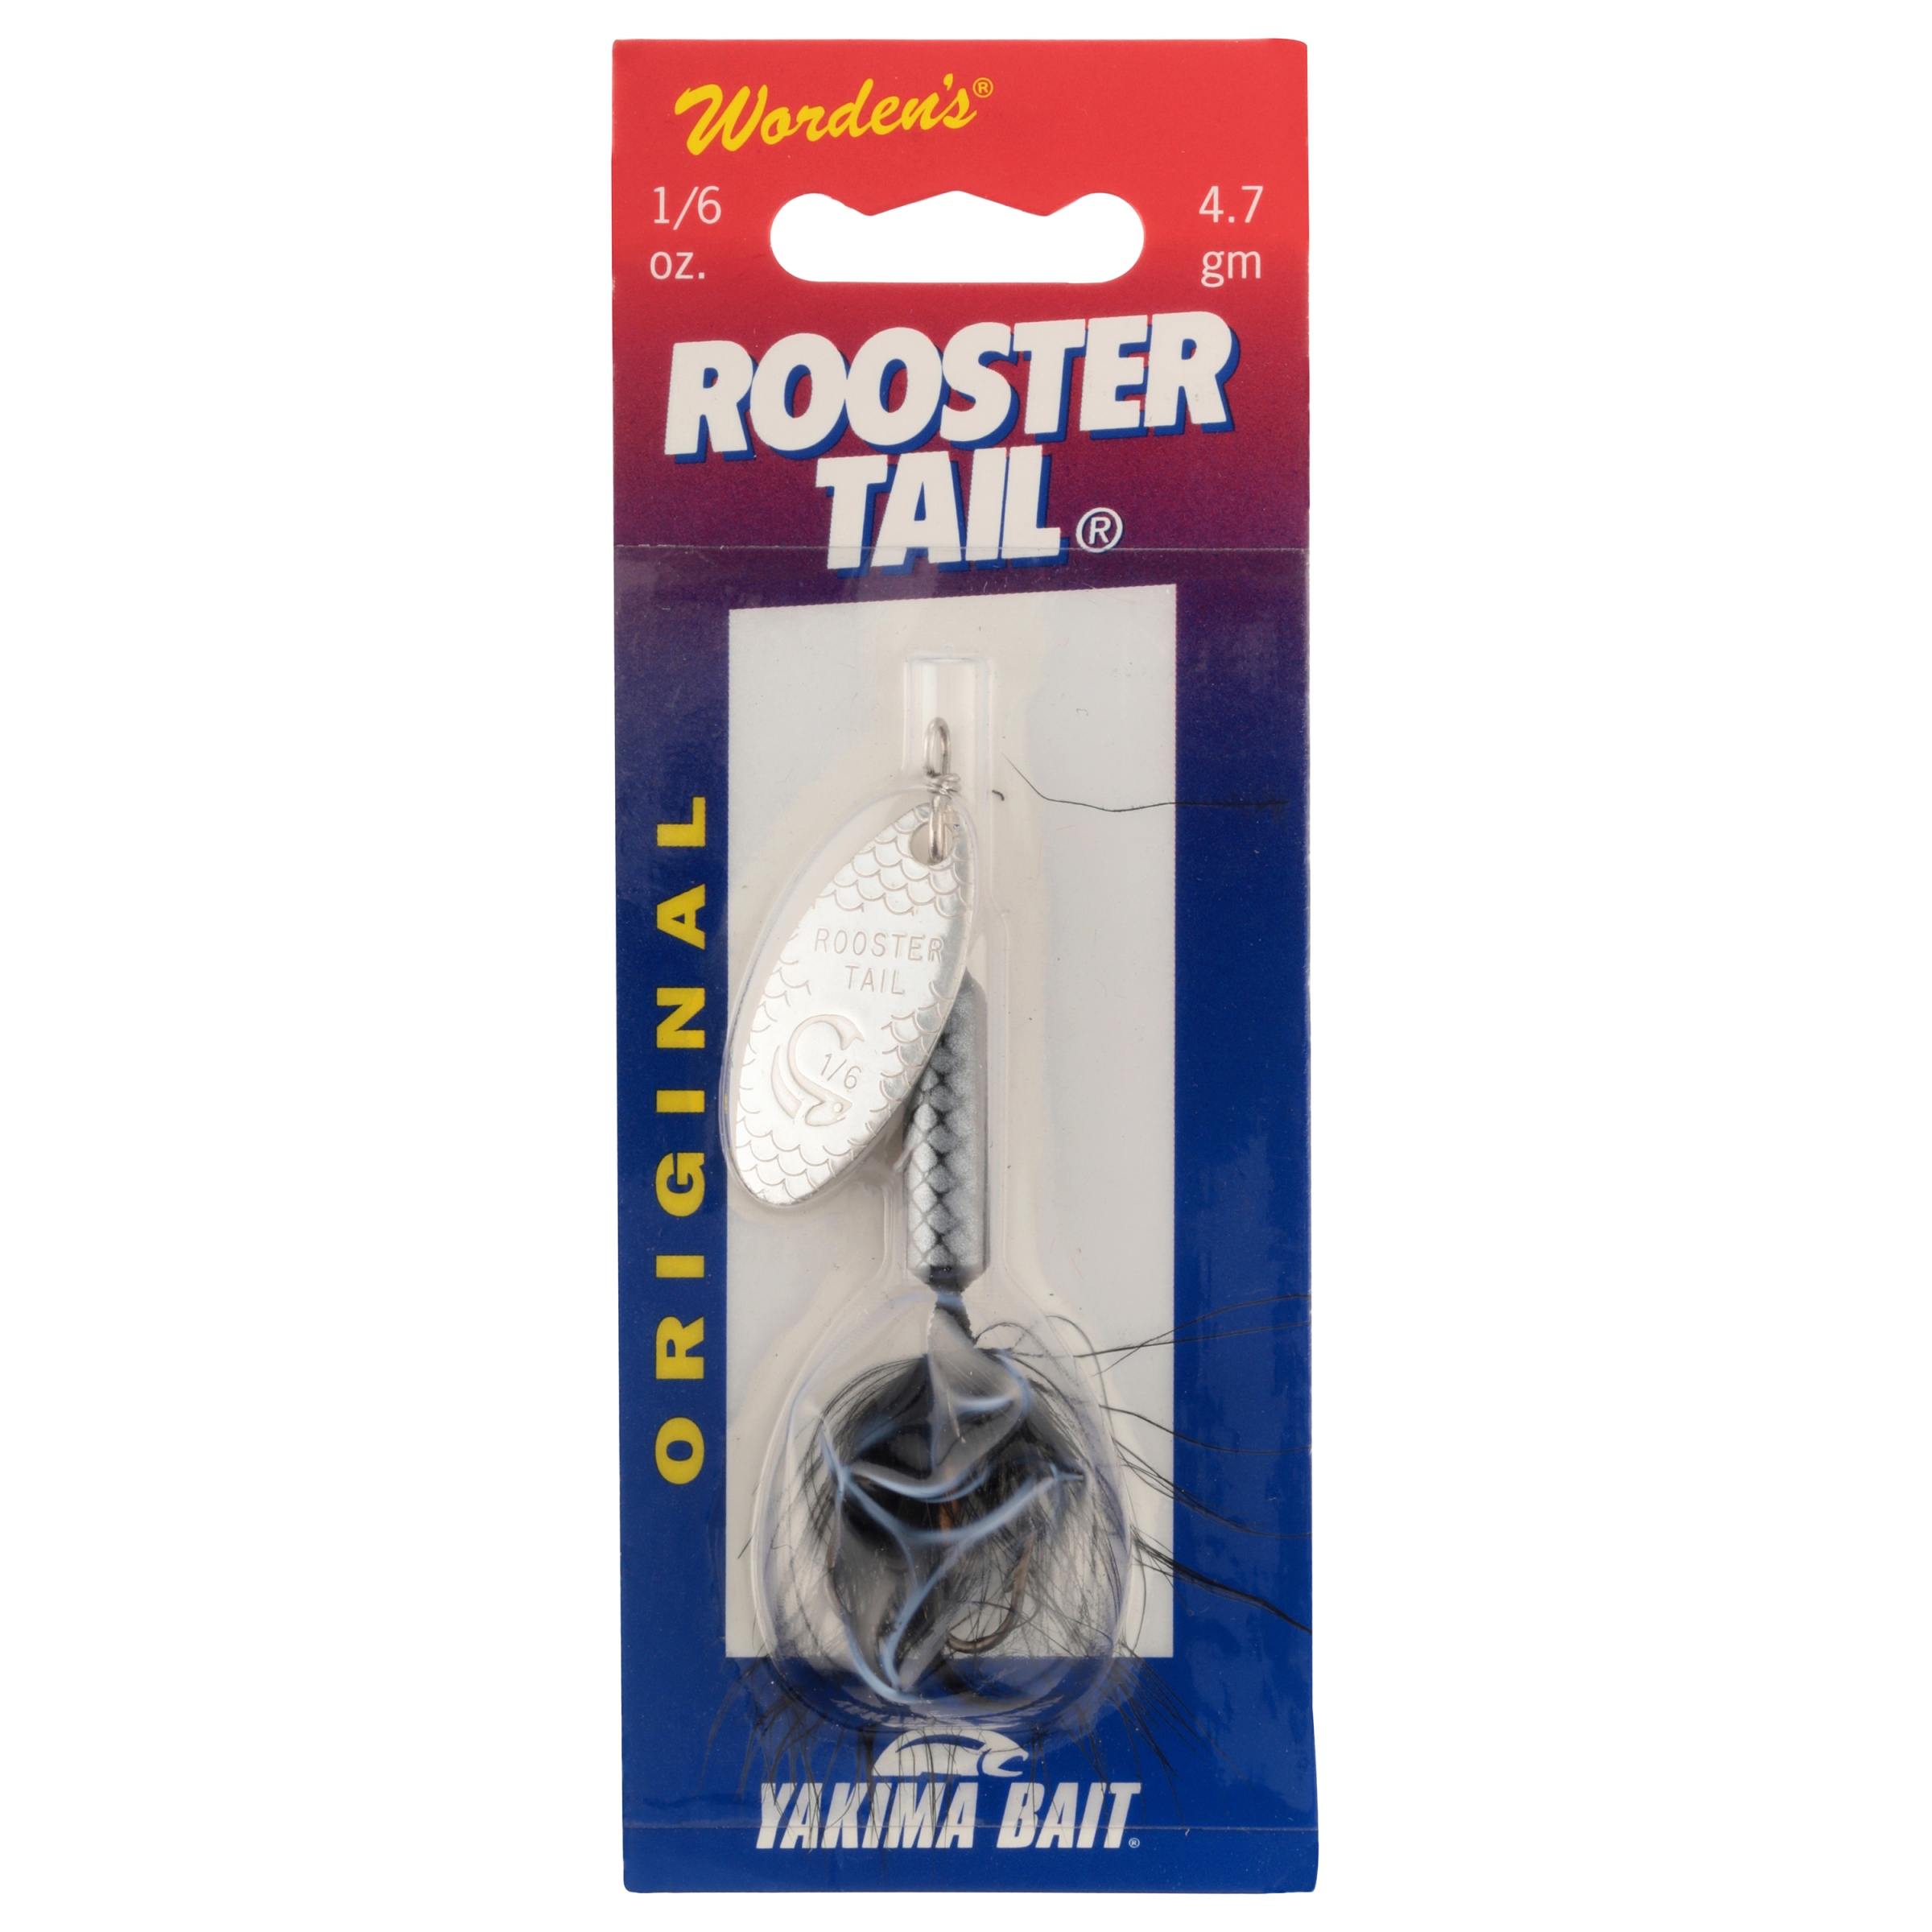 Worden's® Original Black Rooster Tail®, Inline Spinnerbait Fishing Lure, 1/6 oz Carded Pack - image 2 of 4